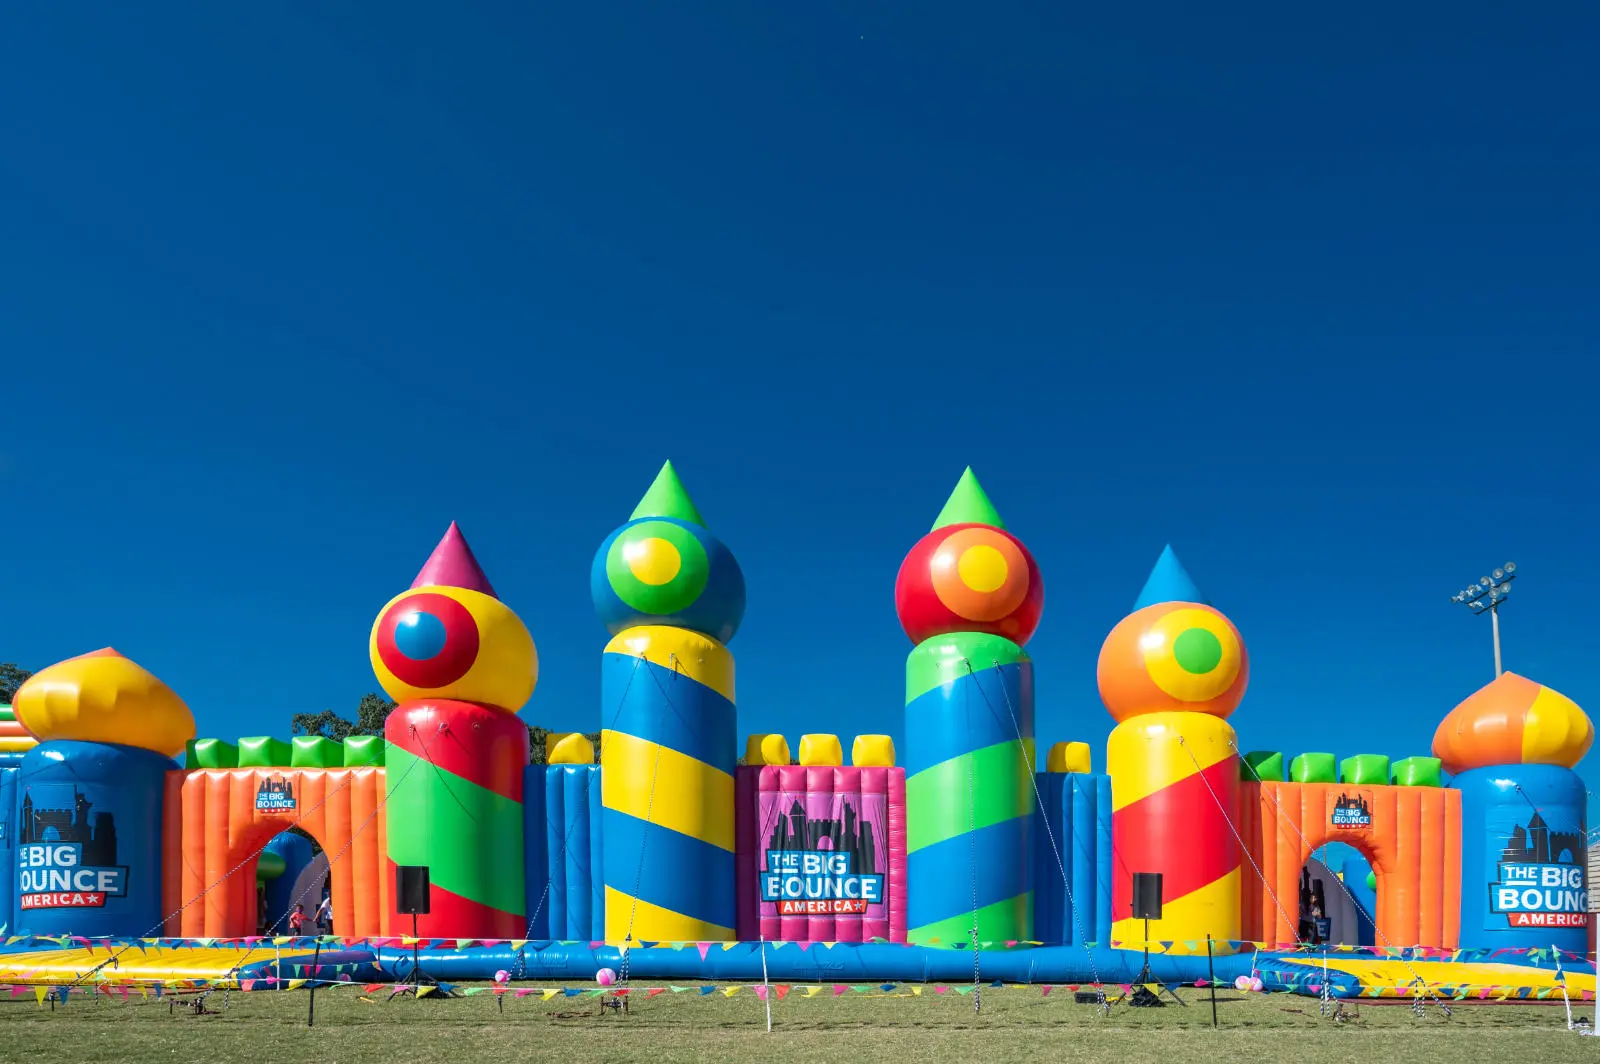 The Big Bounce America The World's Biggest Bounce House!